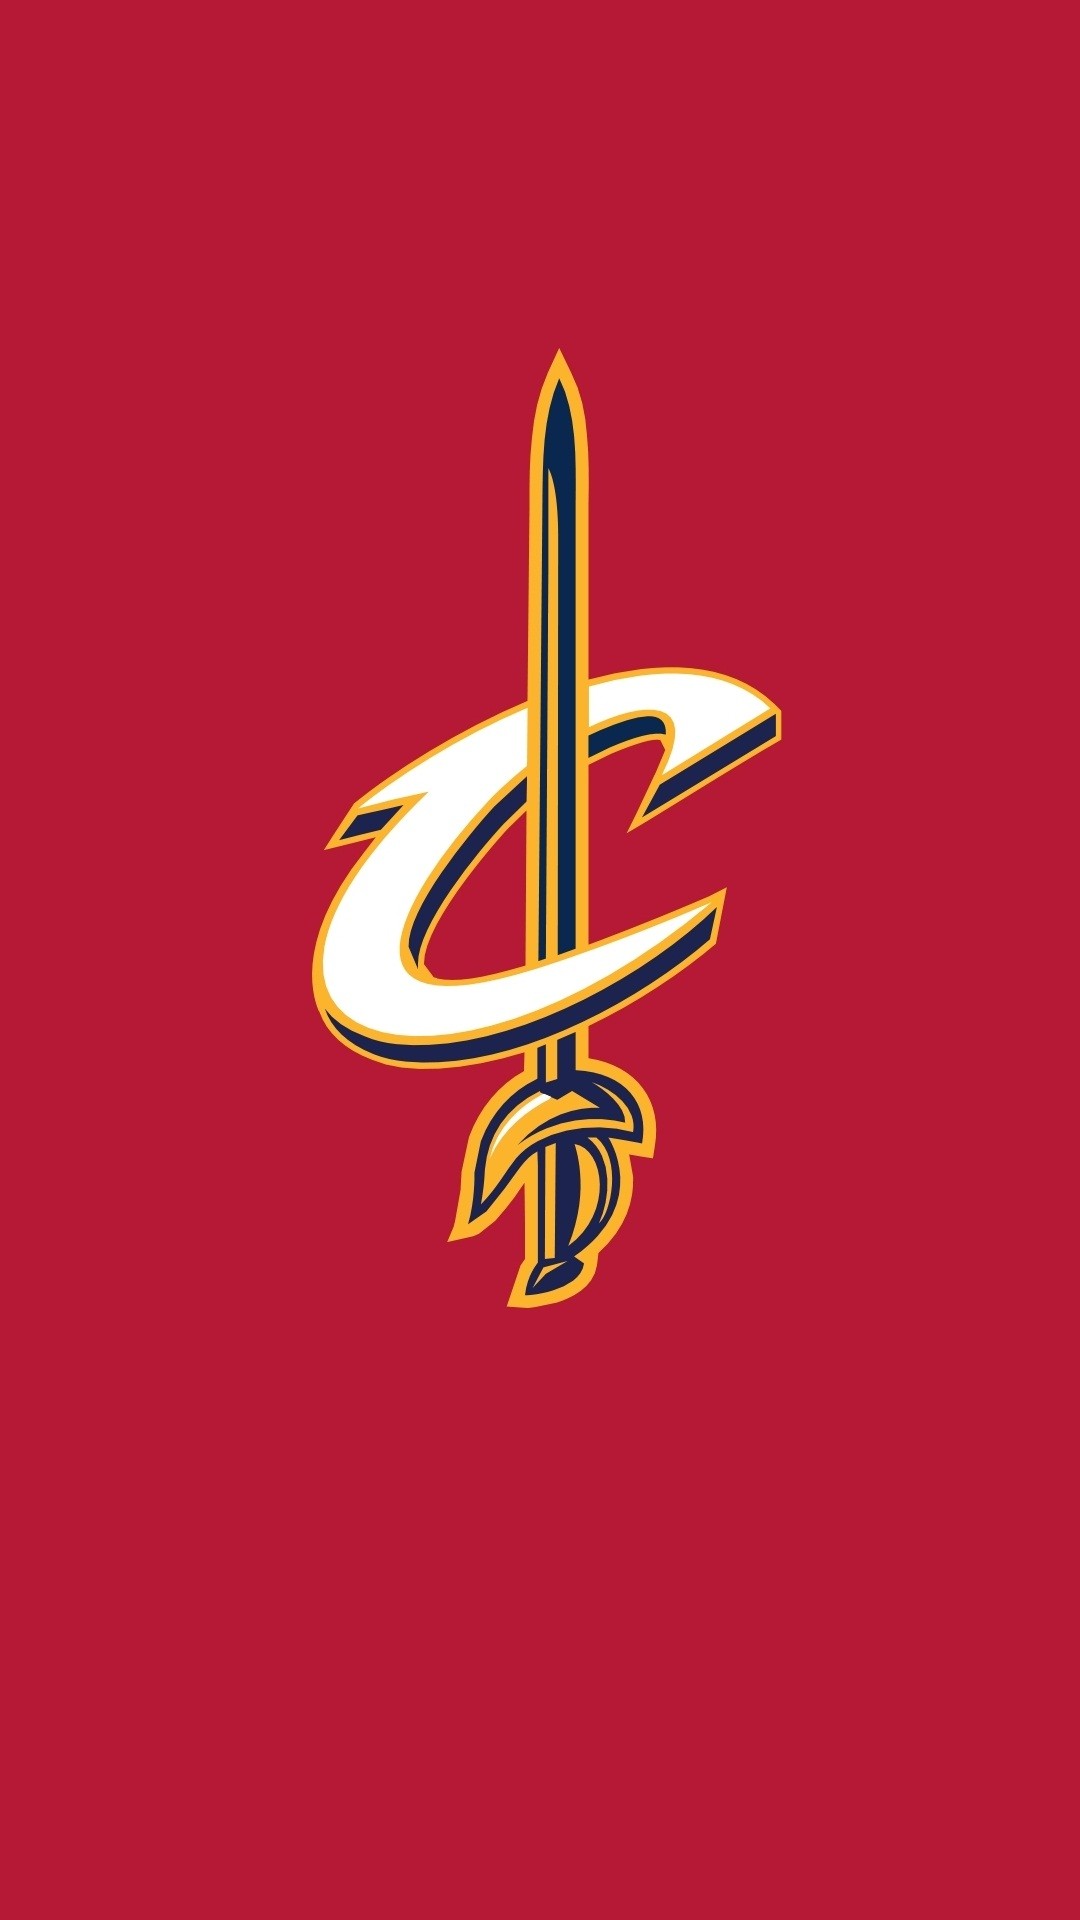 Cleveland Cavaliers Wallpaper For Iphone